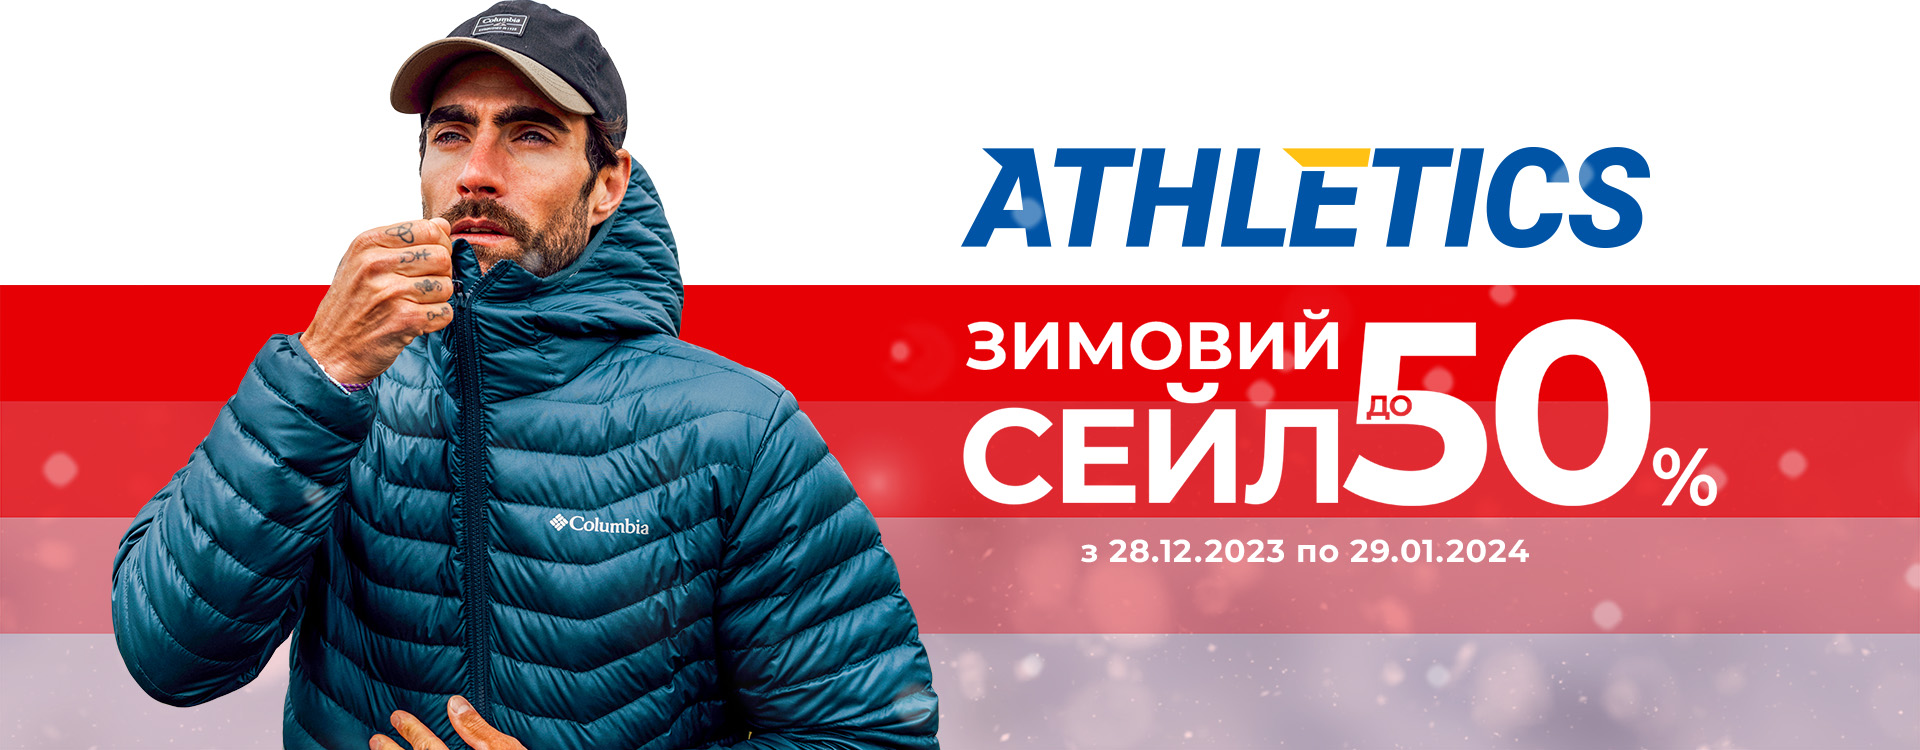 Winter discounts in ATHLETICS stores